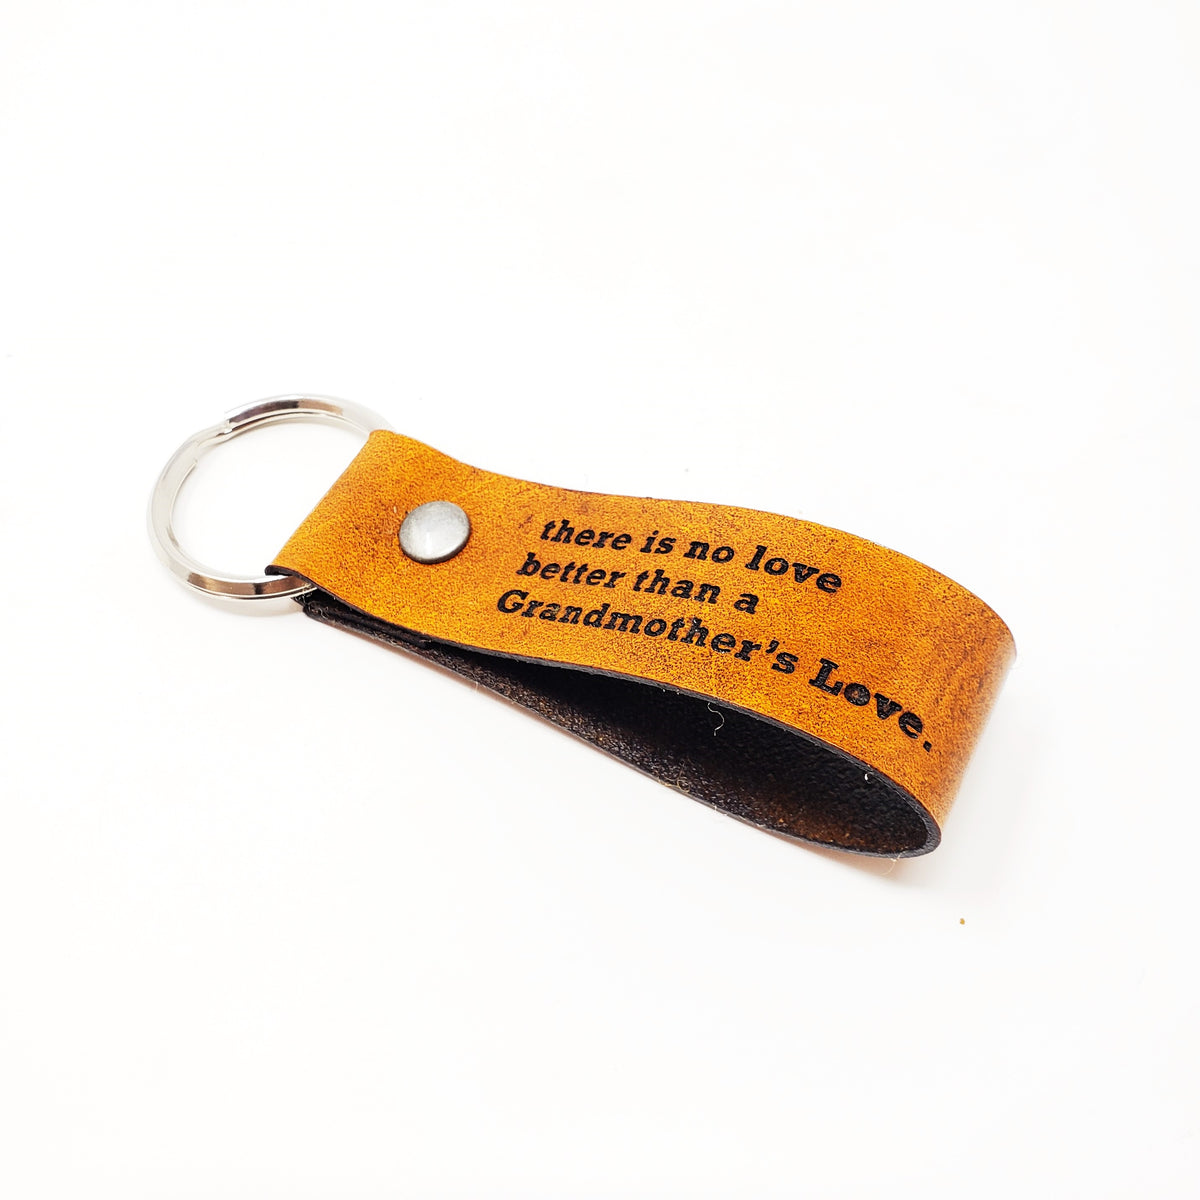 Engraved Leather Keychain - There is No Love Better Than a Grandmother's Love